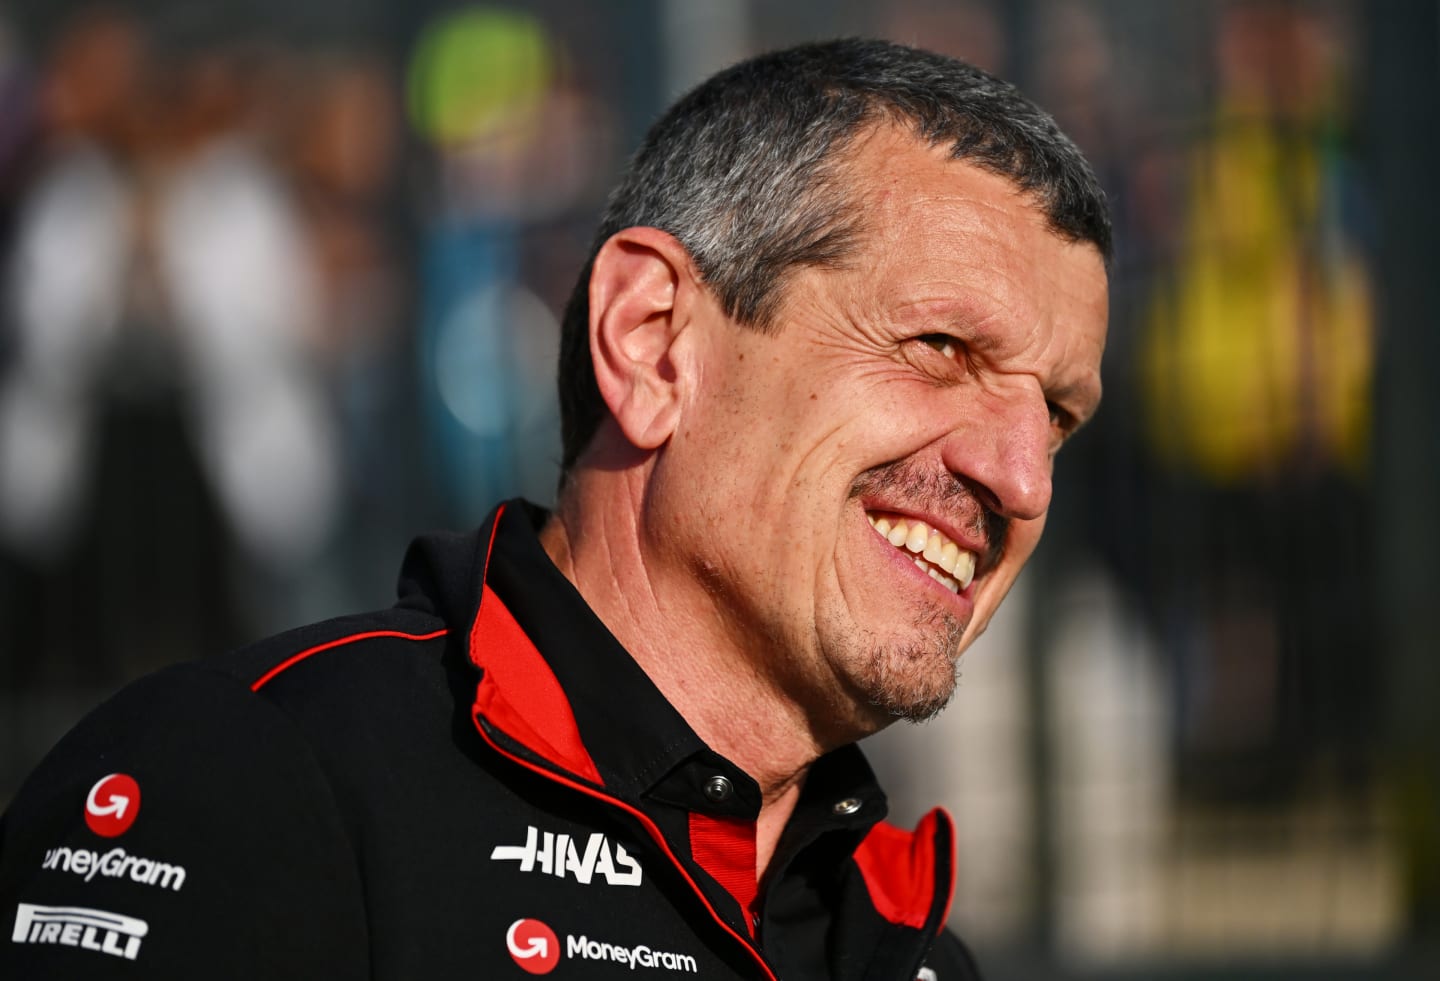 NORTHAMPTON, ENGLAND - JULY 06: Haas F1 Team Principal Guenther Steiner looks on during previews